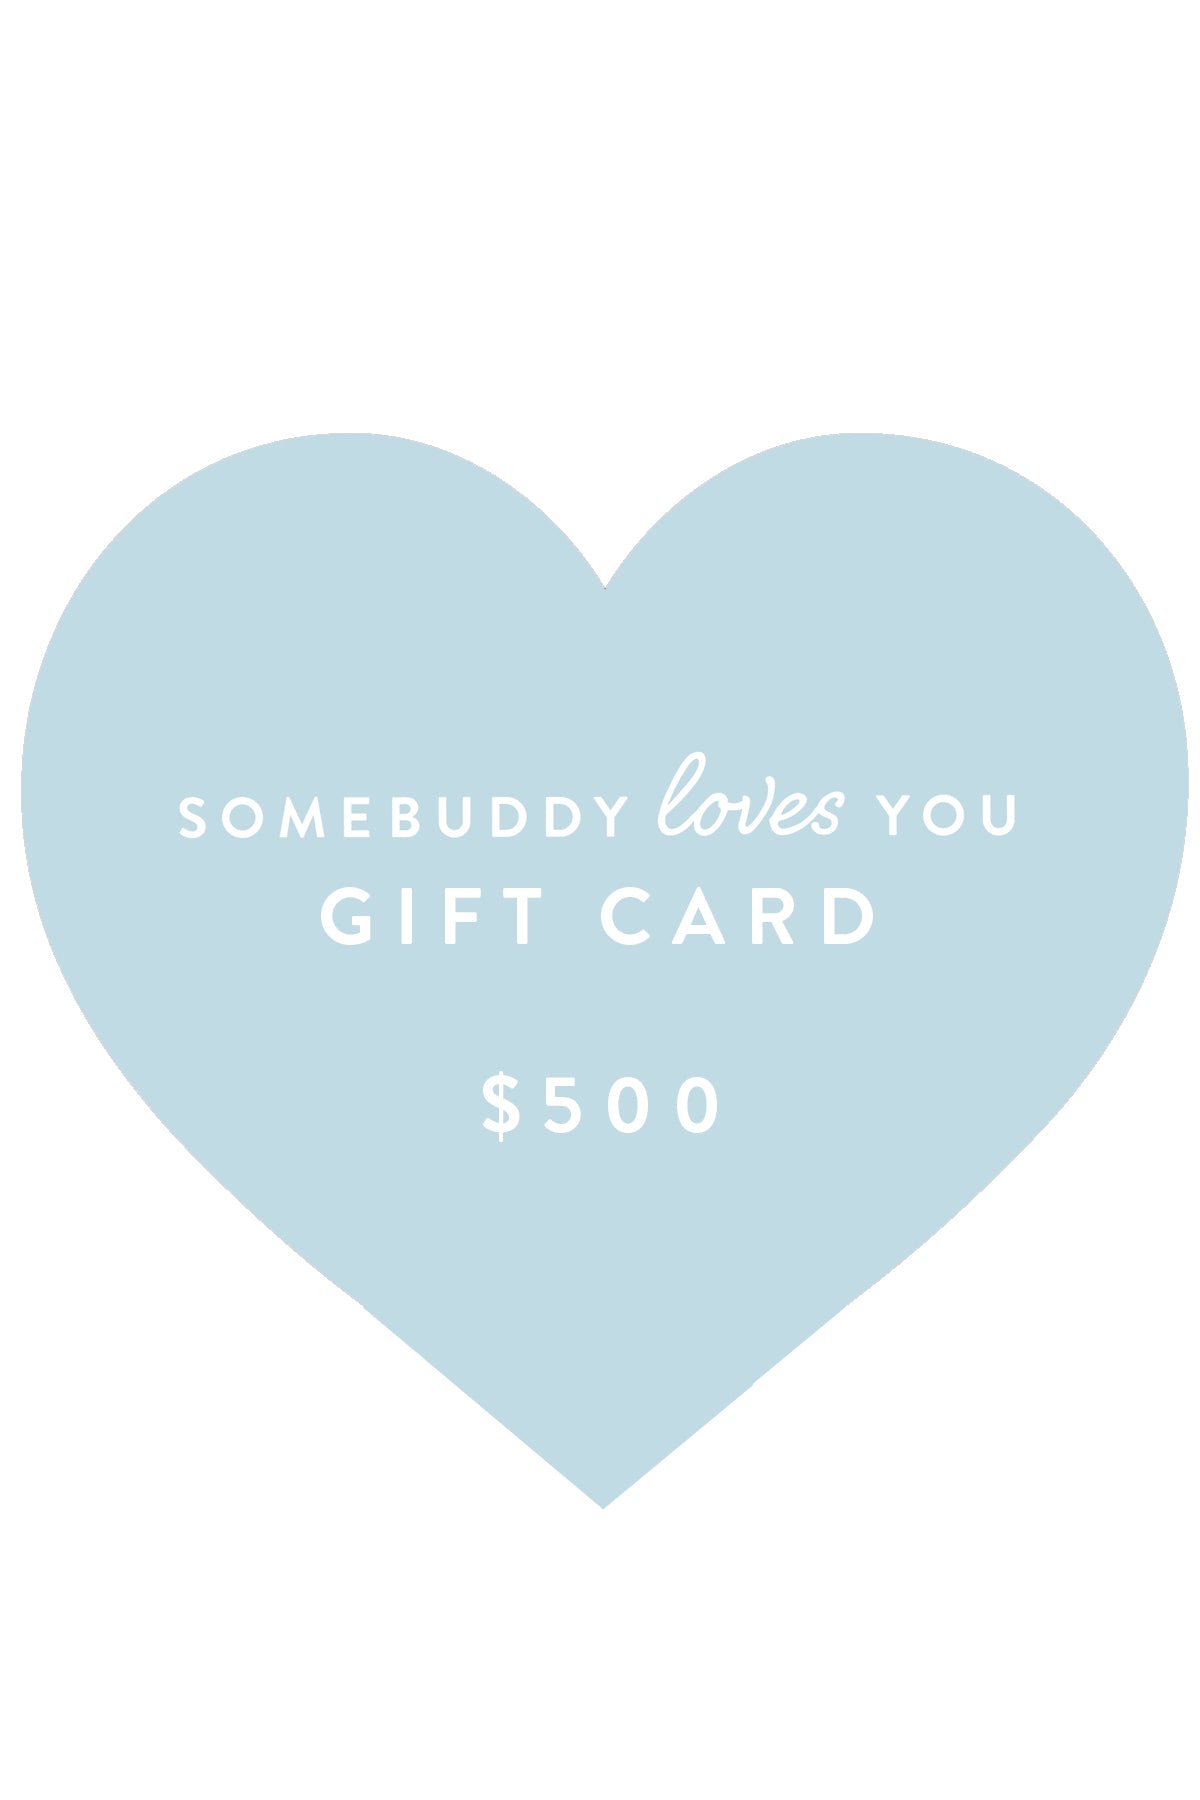 Somebuddy Loves You Gift Card $500